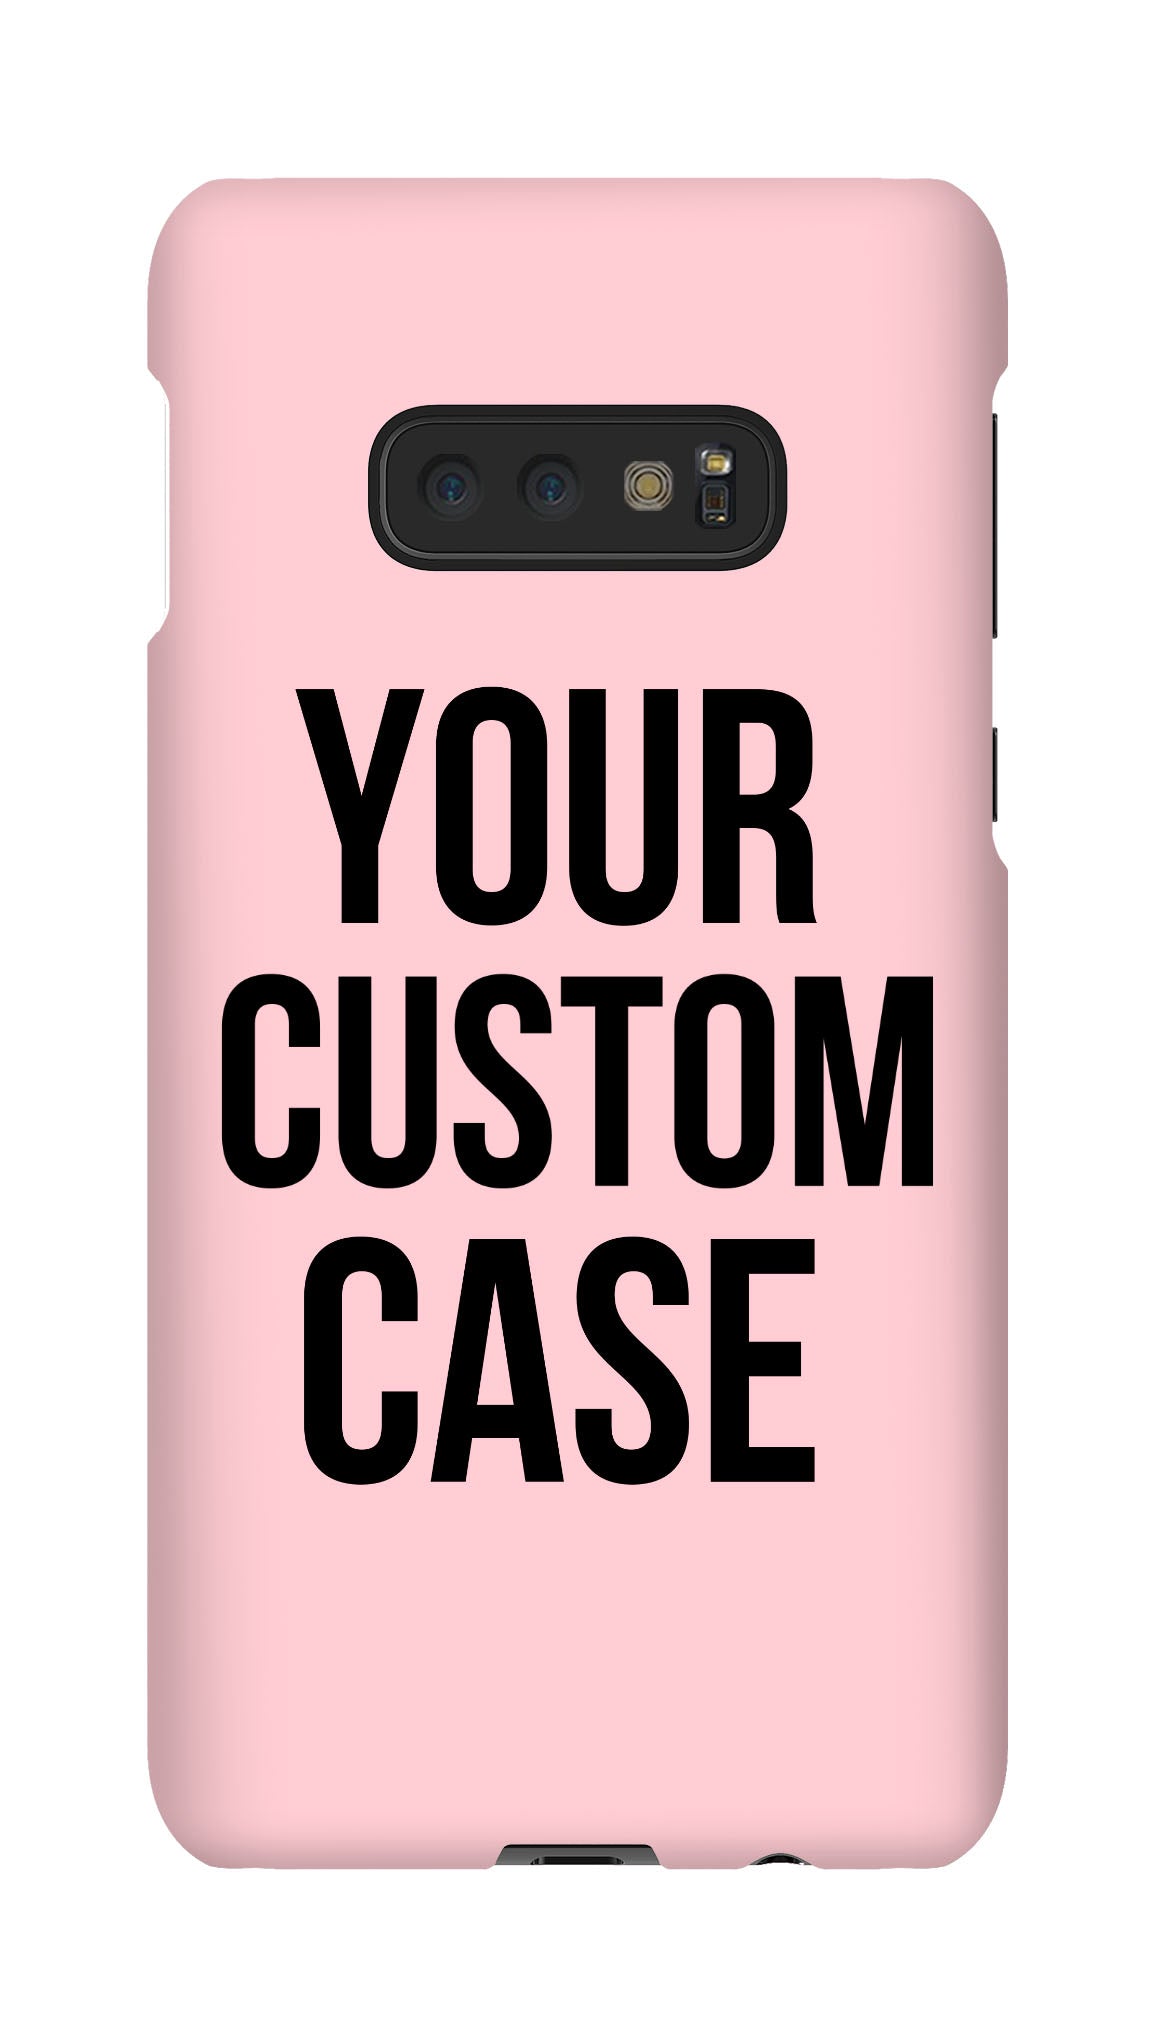 Custom Galaxy S10E Slim Case - Your Custom Design in Cart will be Shipped - Pixly Case